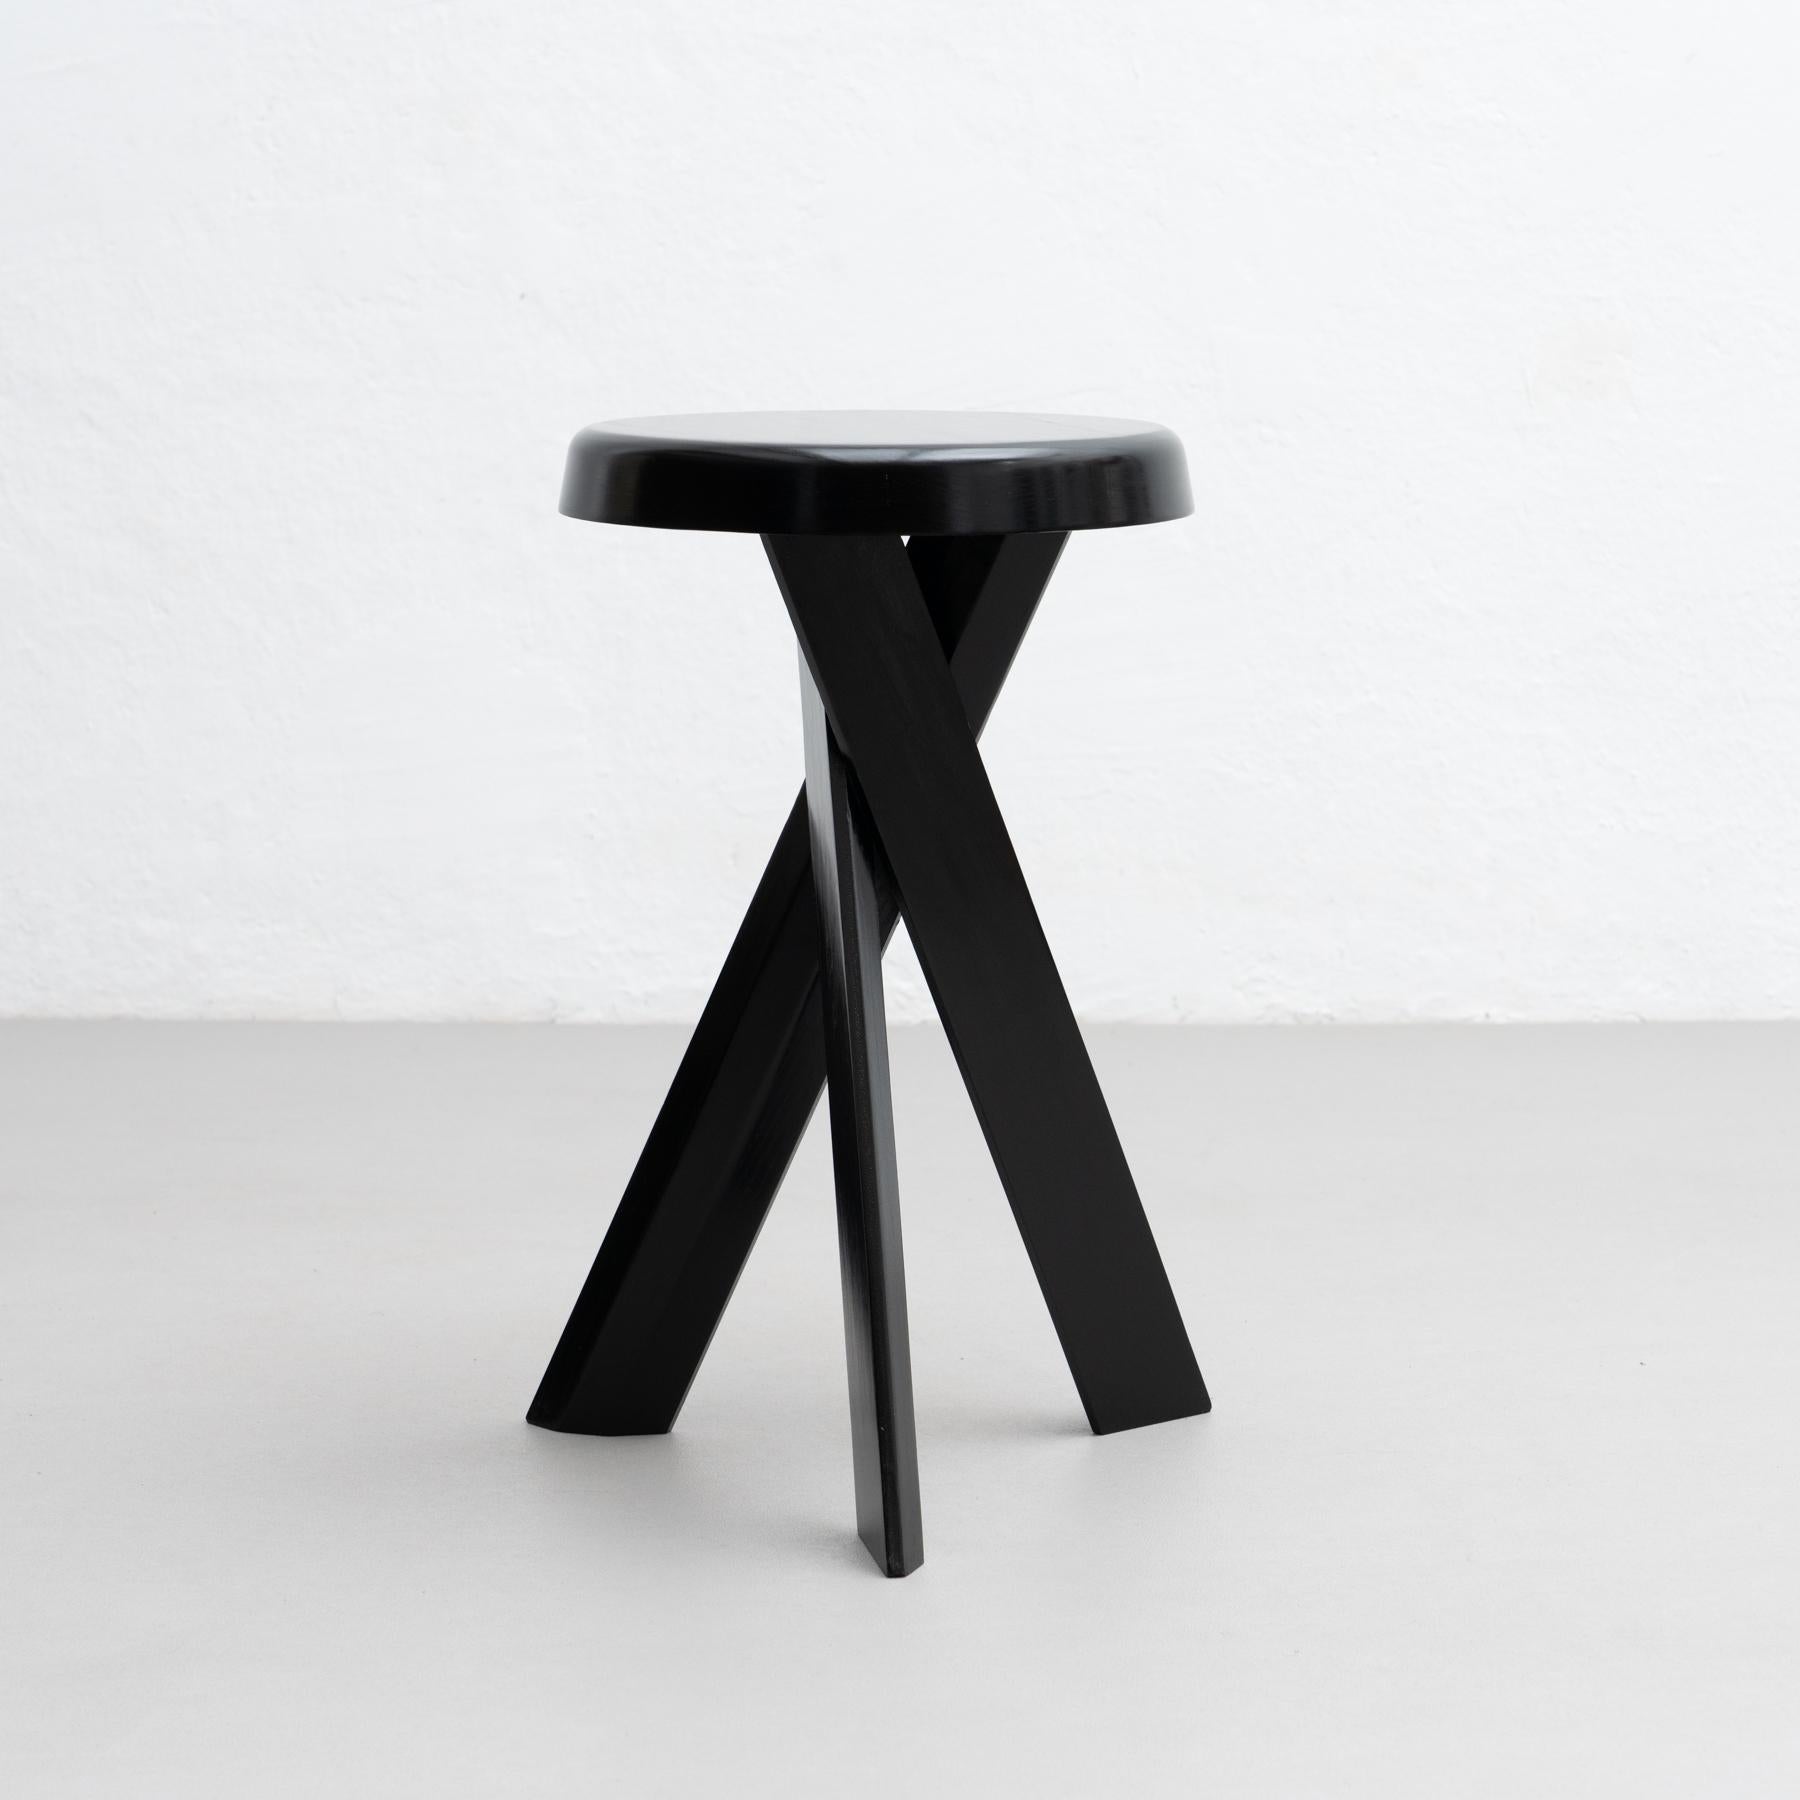 Stool, model S31B designed by Pierre Chapo in 1960s.
Manufactured in France by Chapo Creations in 2021. 
Stamped by the manufacturer.

In good original condition, with minor wear consistent with age and use, preserving a beautiful